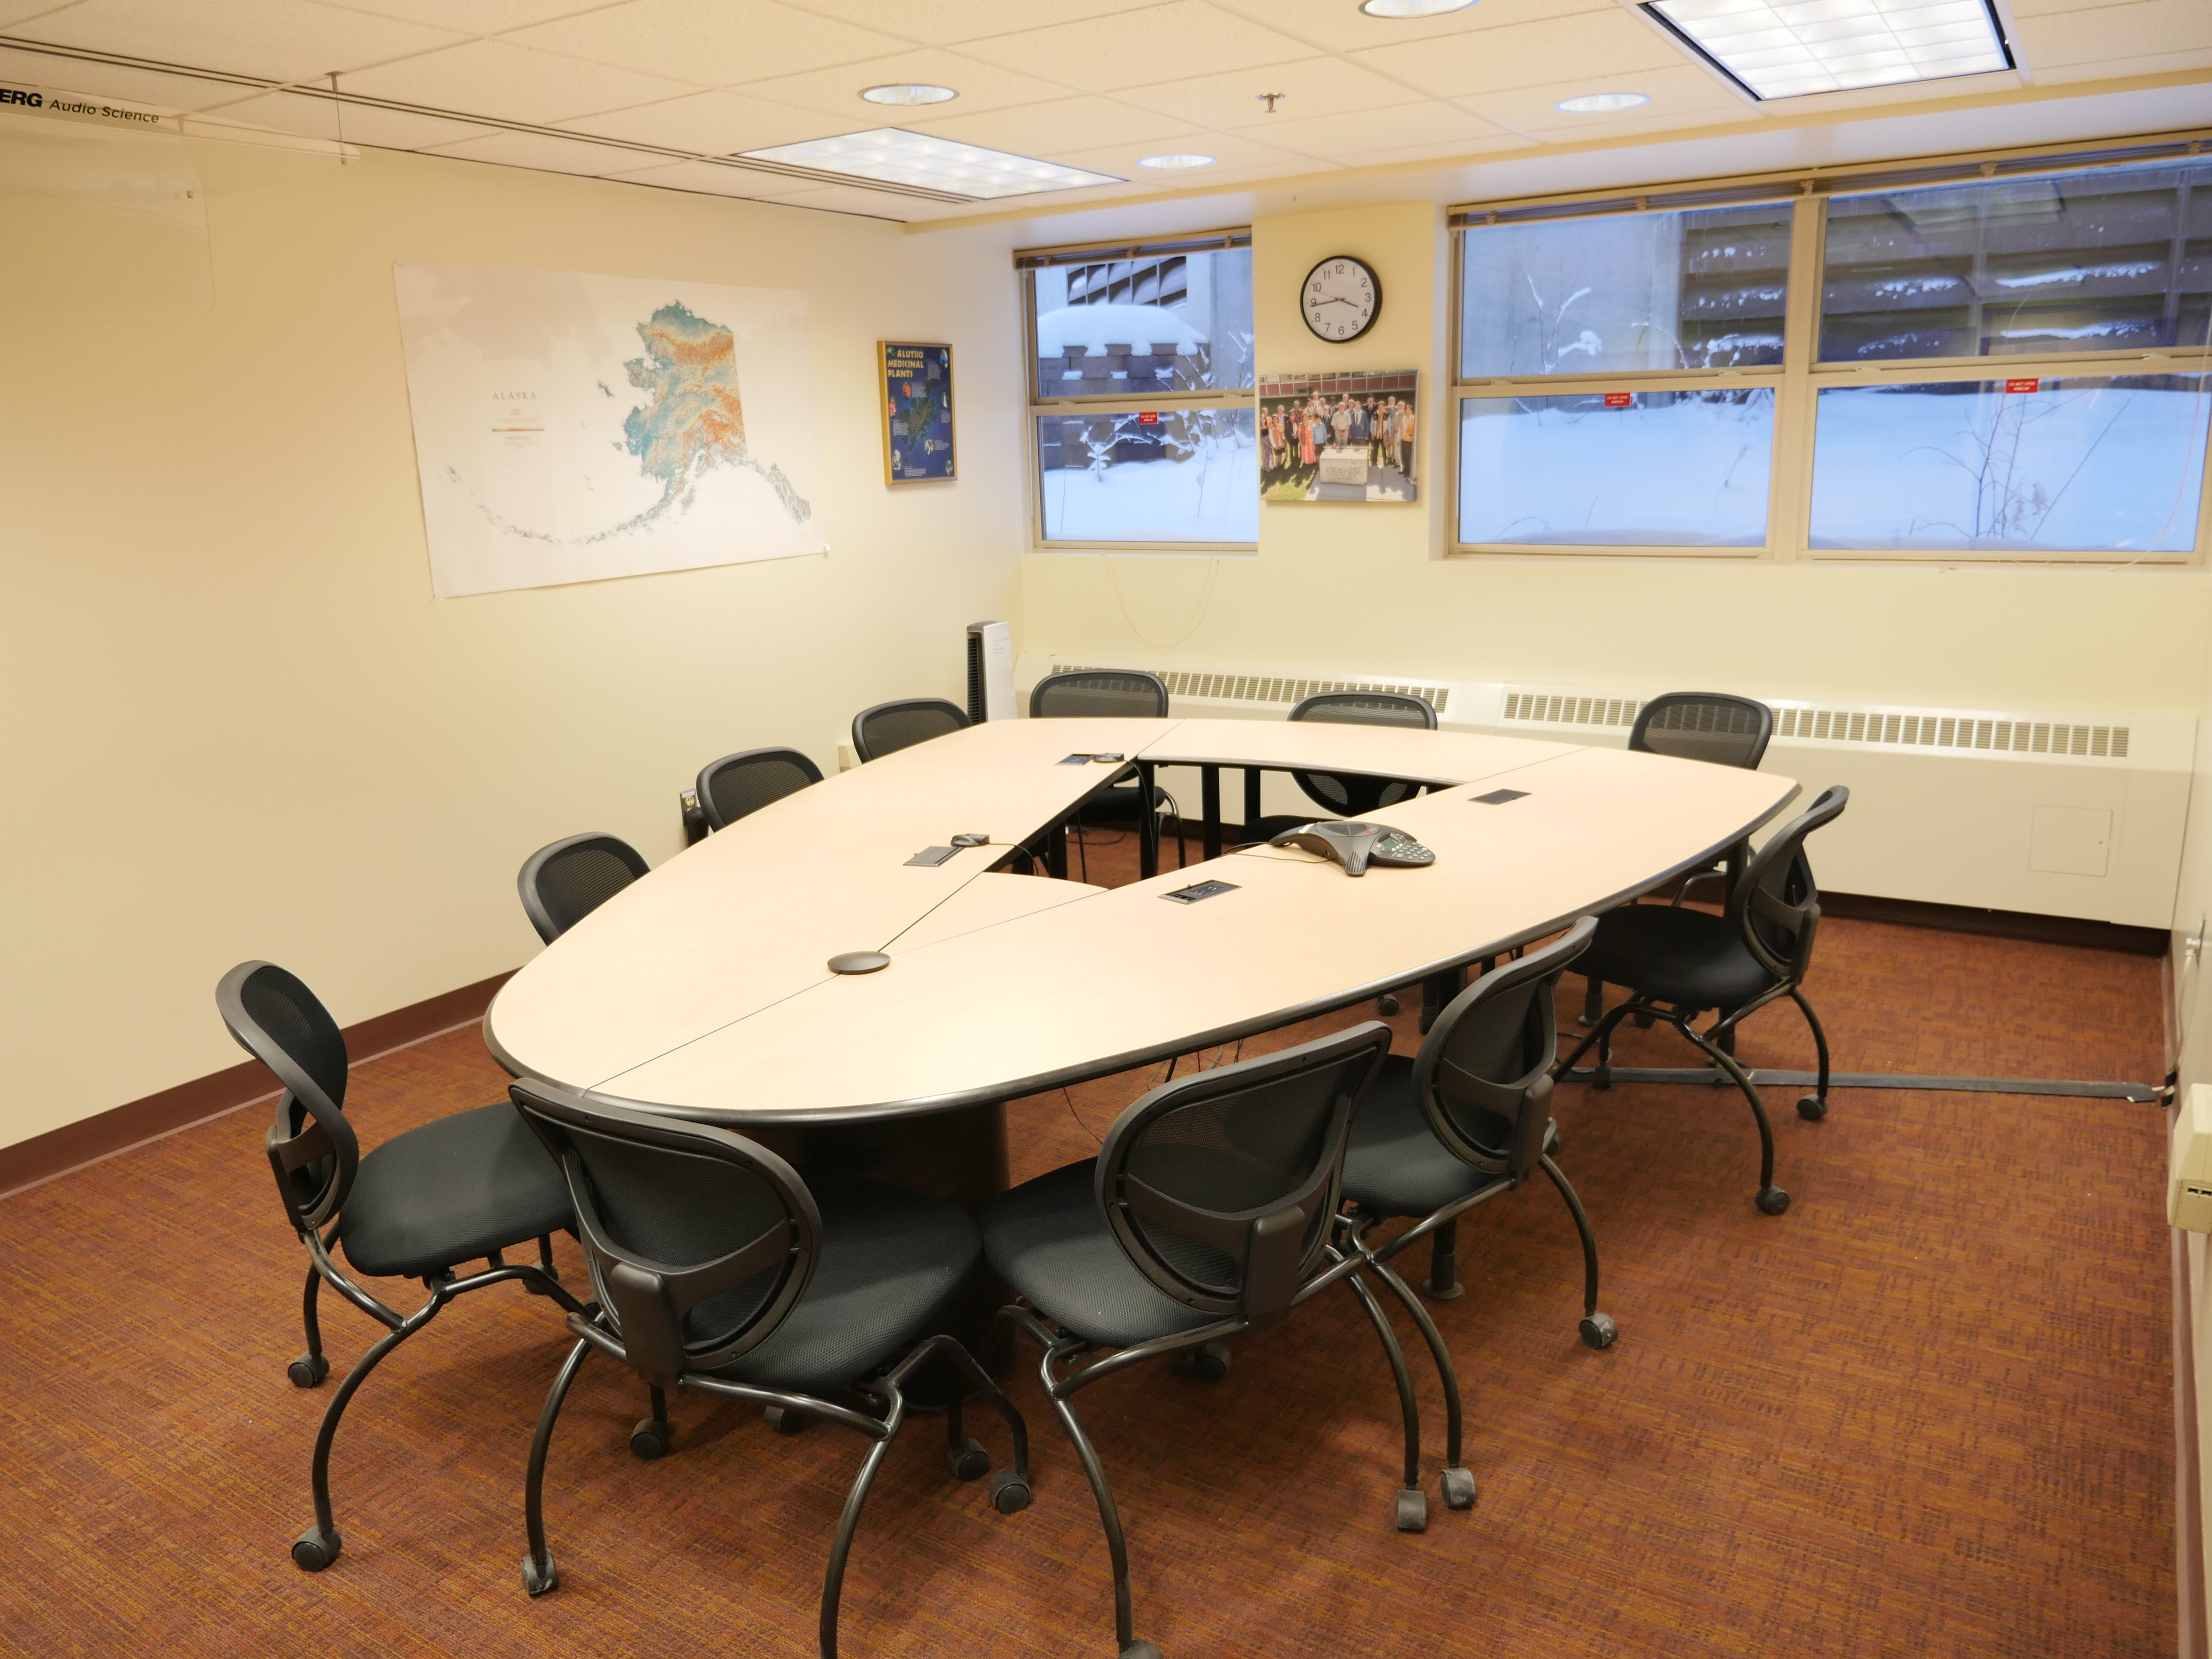 Conference room as seen from entrance